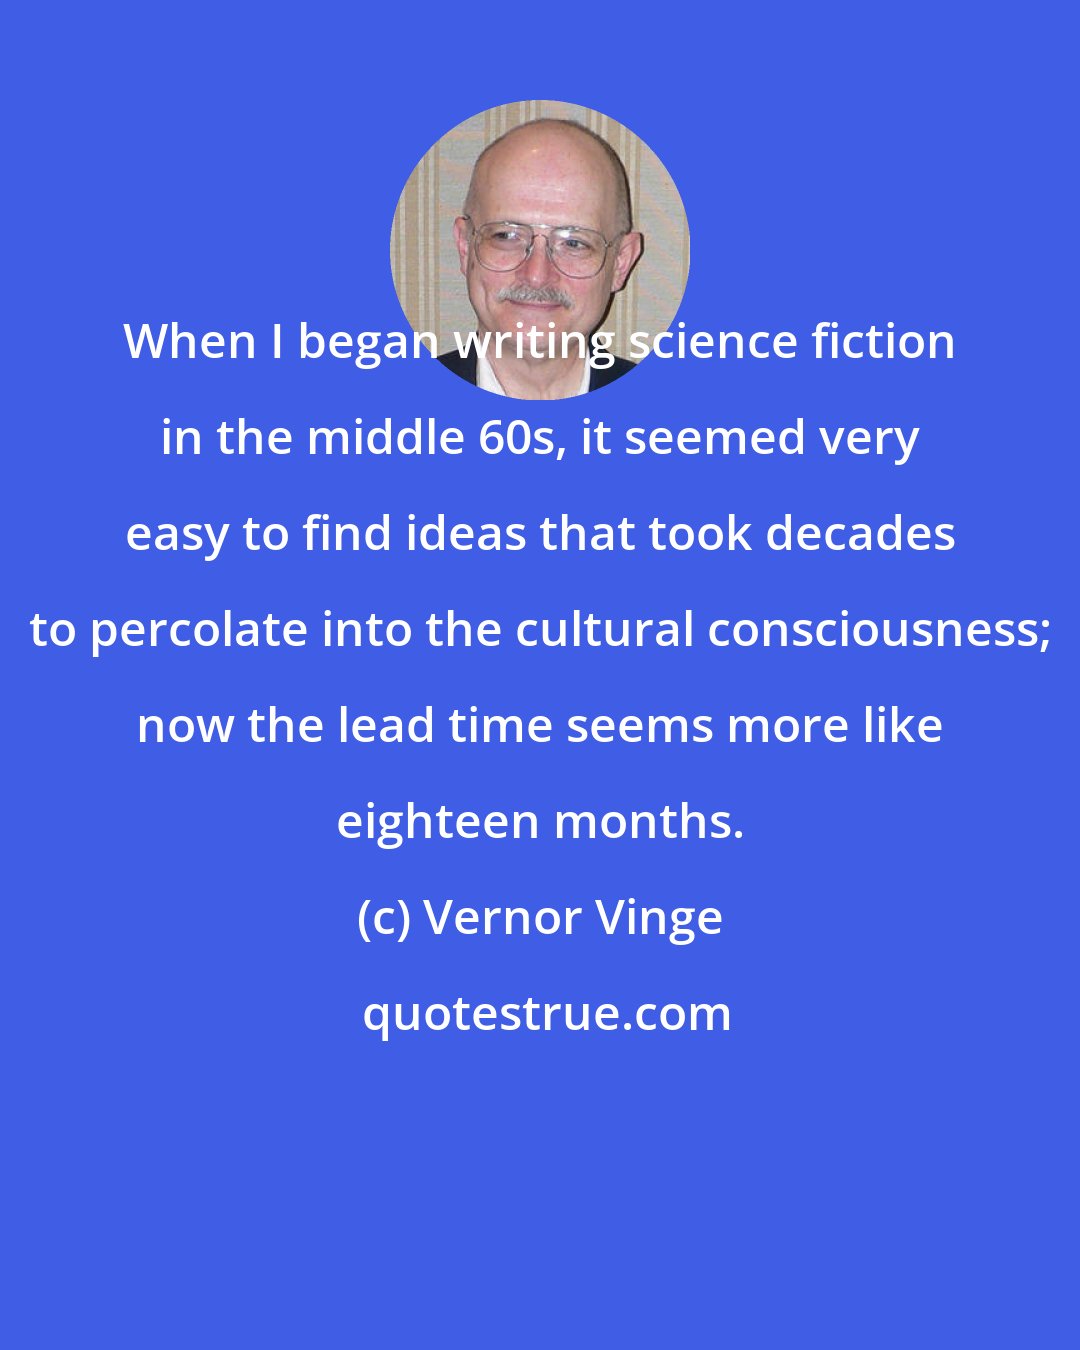 Vernor Vinge: When I began writing science fiction in the middle 60s, it seemed very easy to find ideas that took decades to percolate into the cultural consciousness; now the lead time seems more like eighteen months.